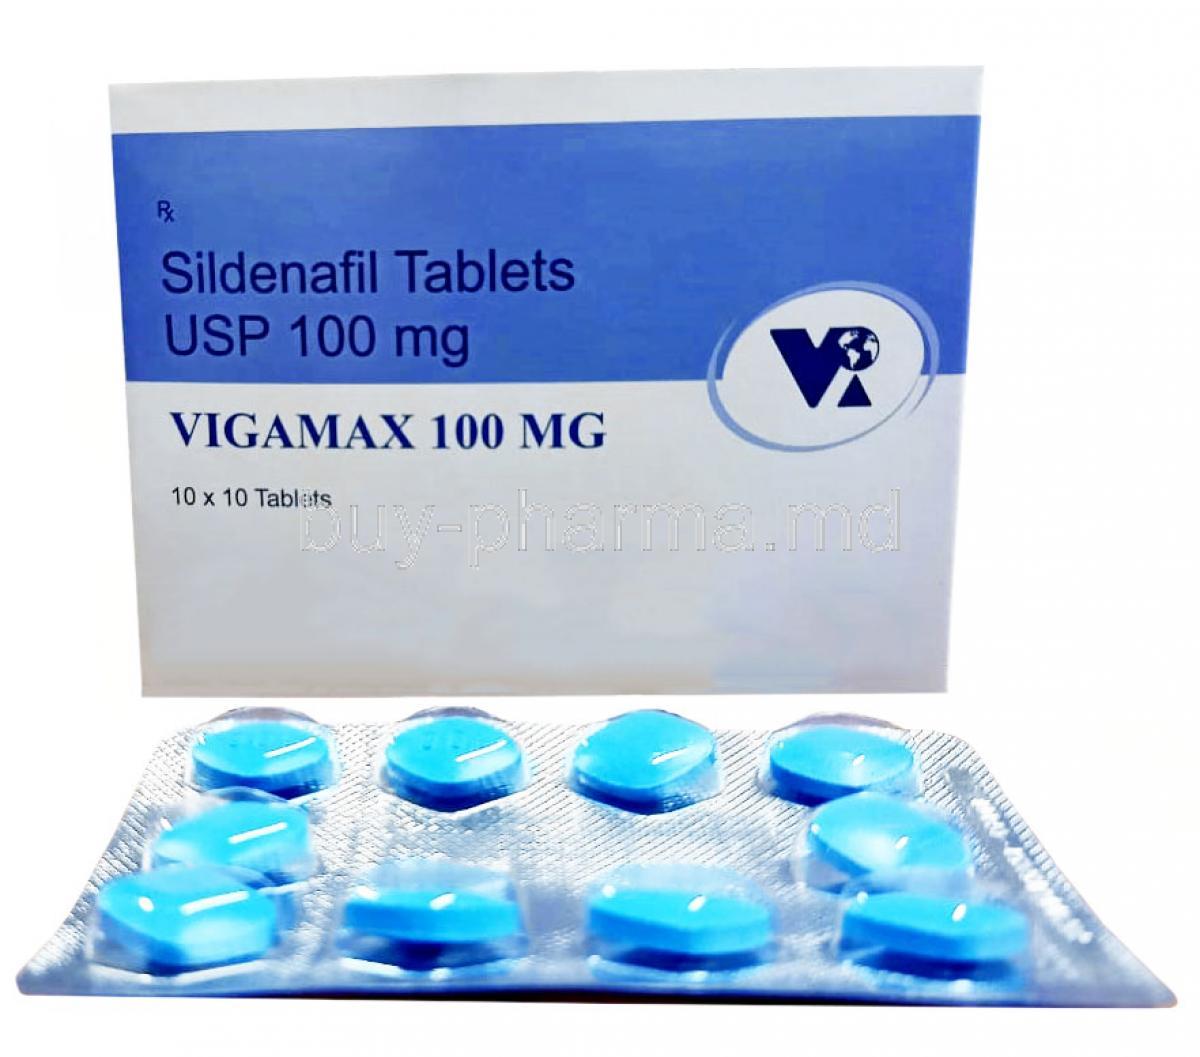 Buy Sildenafil Citrate 100mg Oral Jelly (7 Flavors) Online